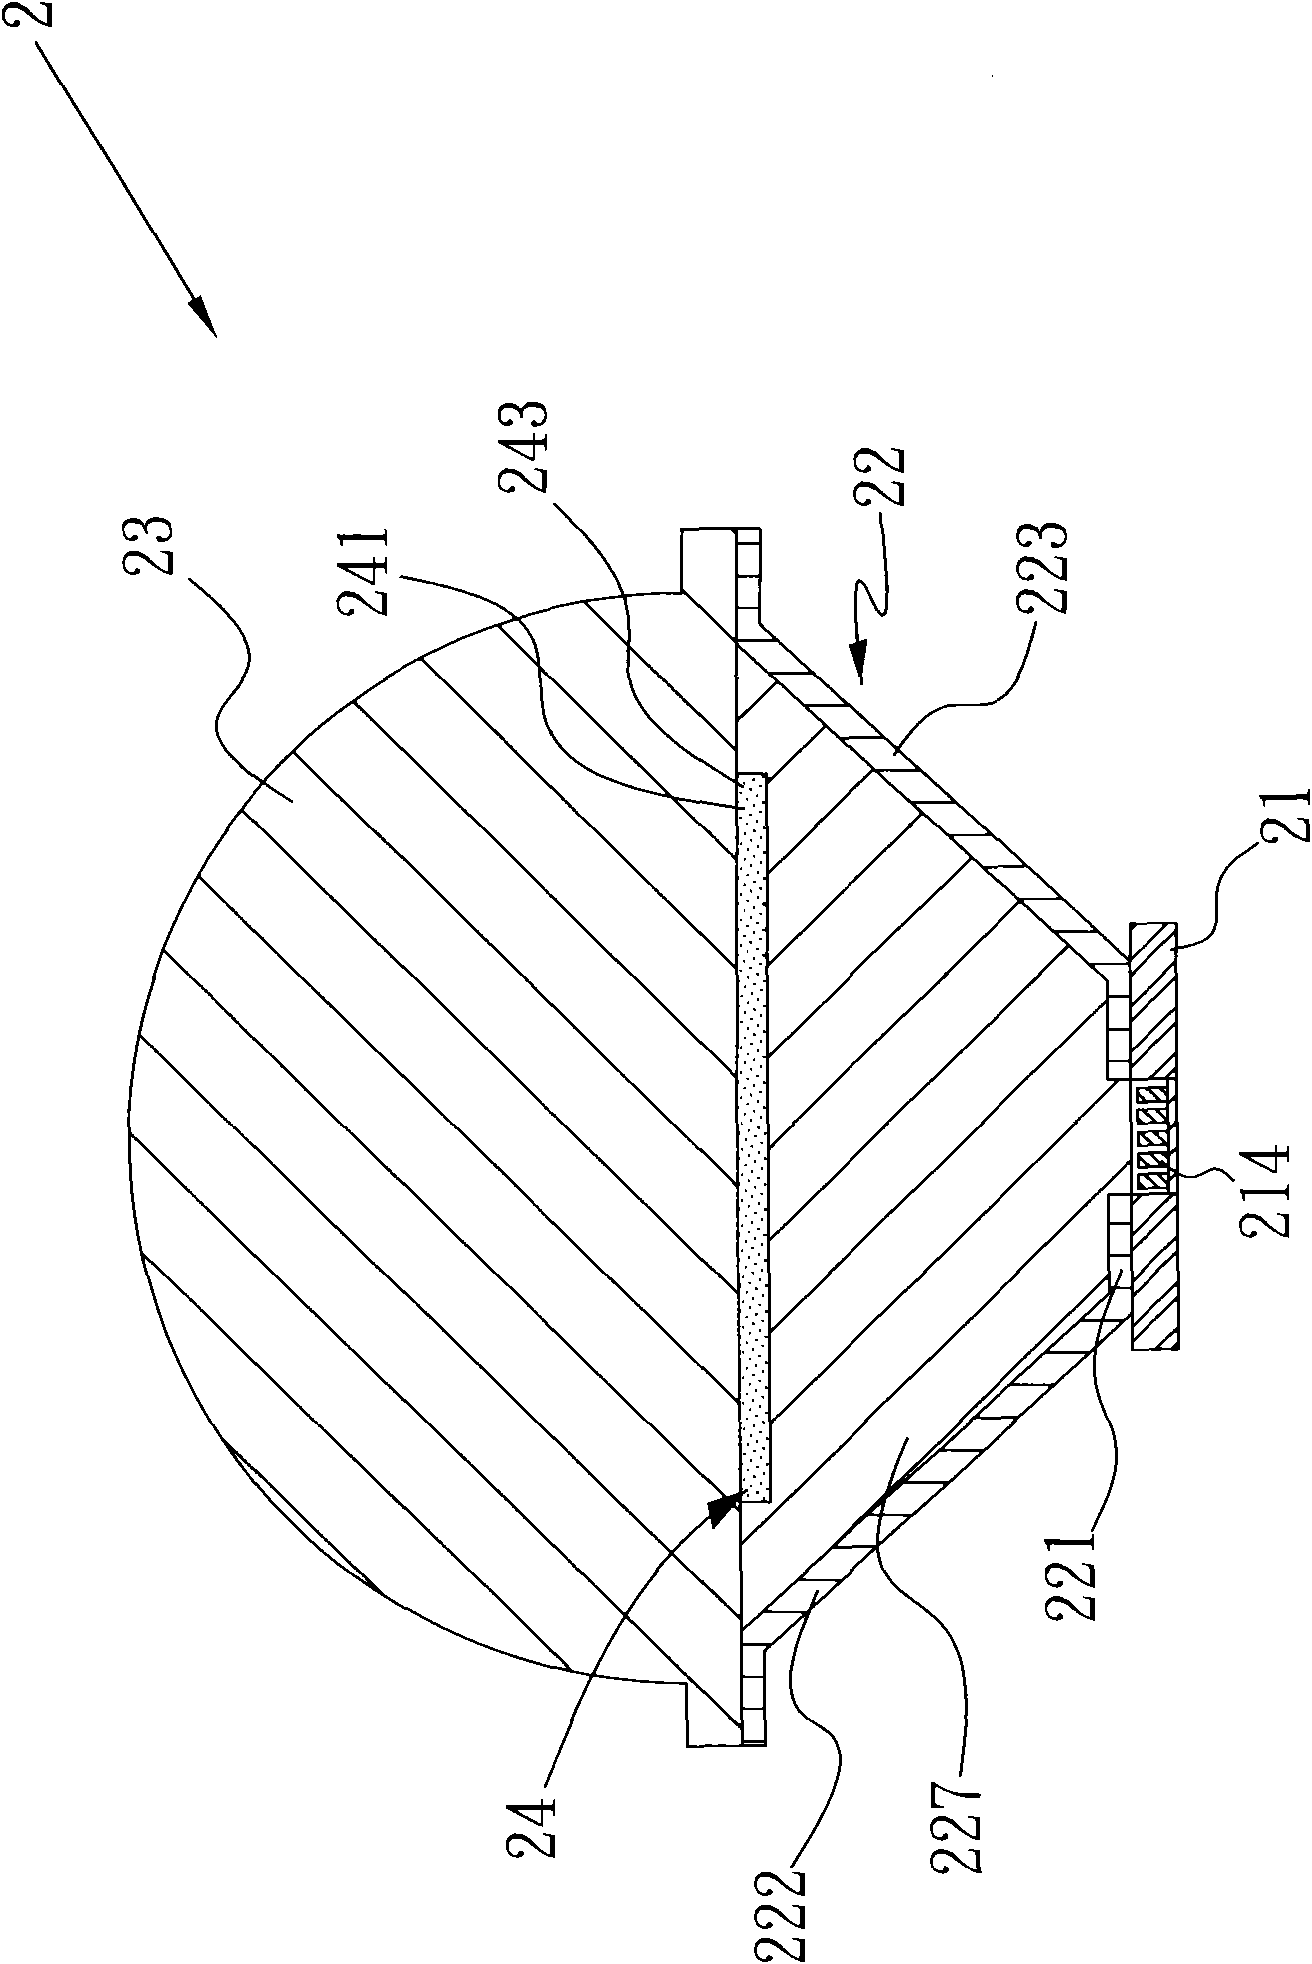 Improvement of light-emitting diode (LED) module and lighting fixture structure